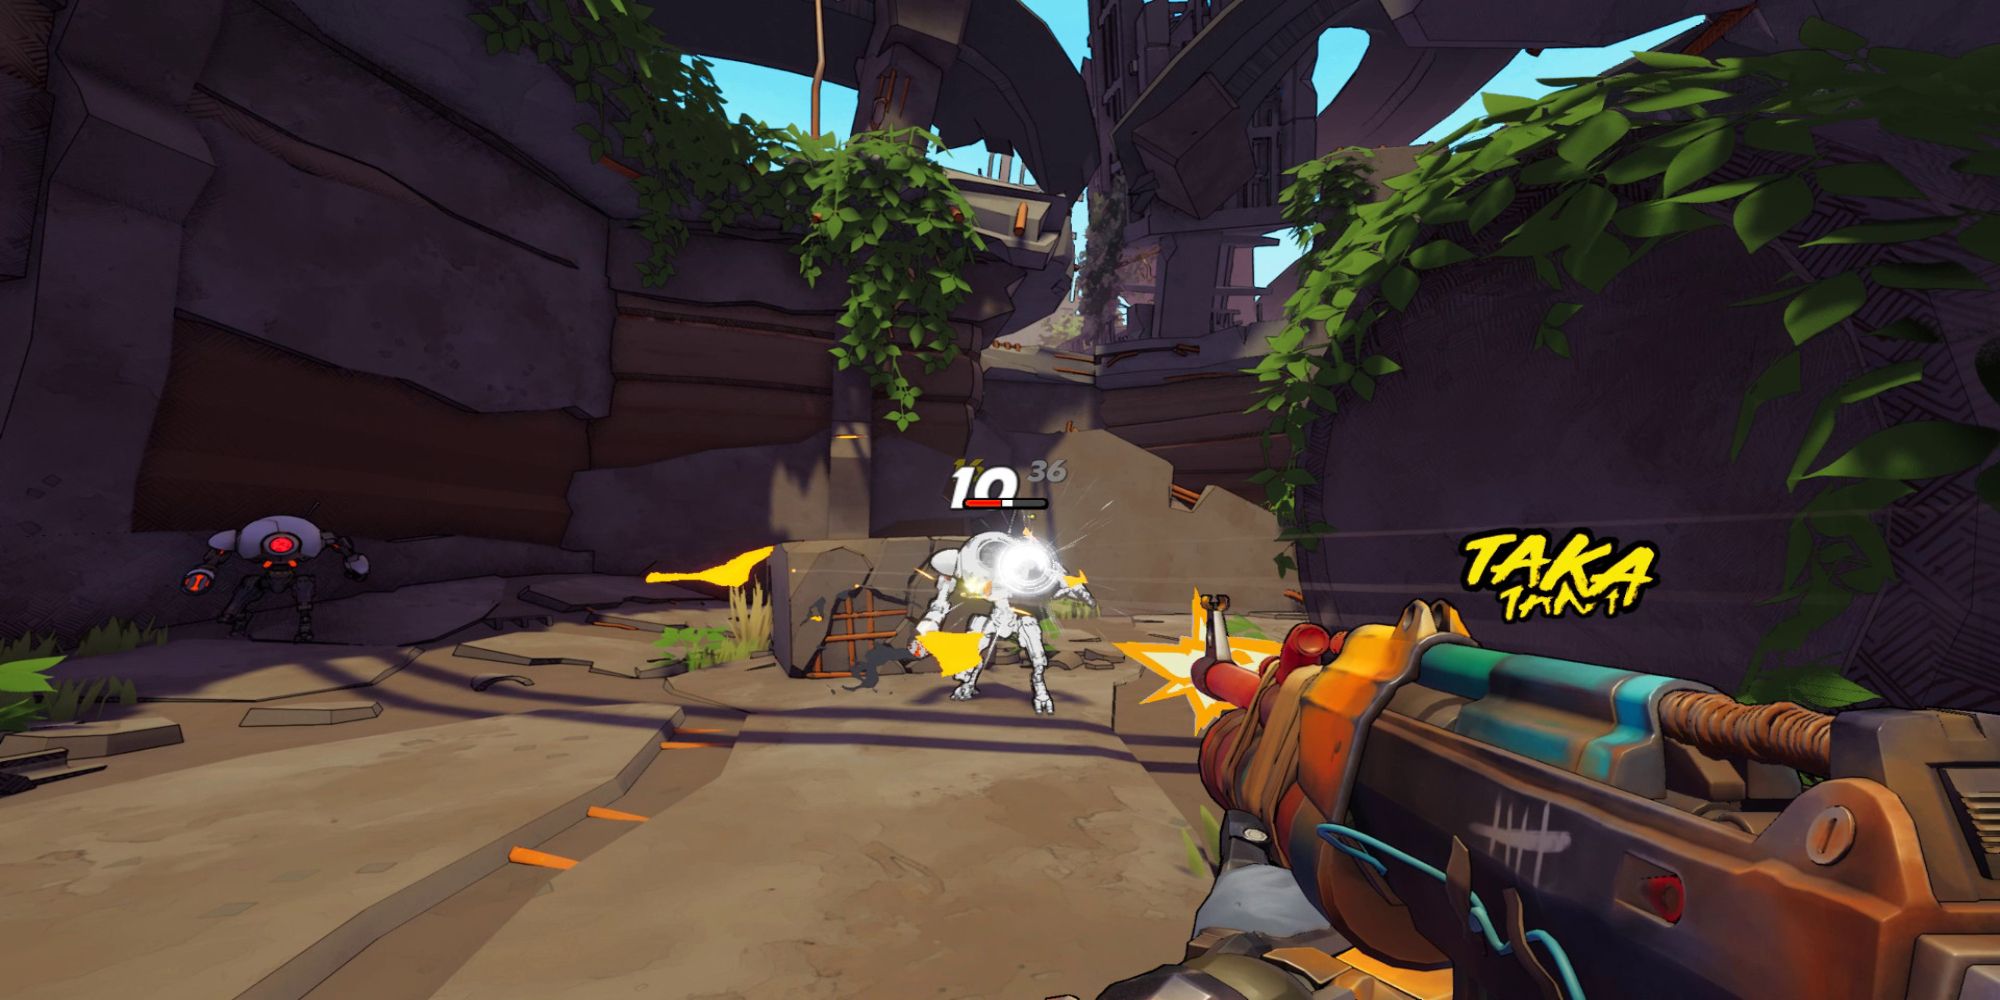 The puncture affix is attached to the gun as the player shoots at a robotic enemy